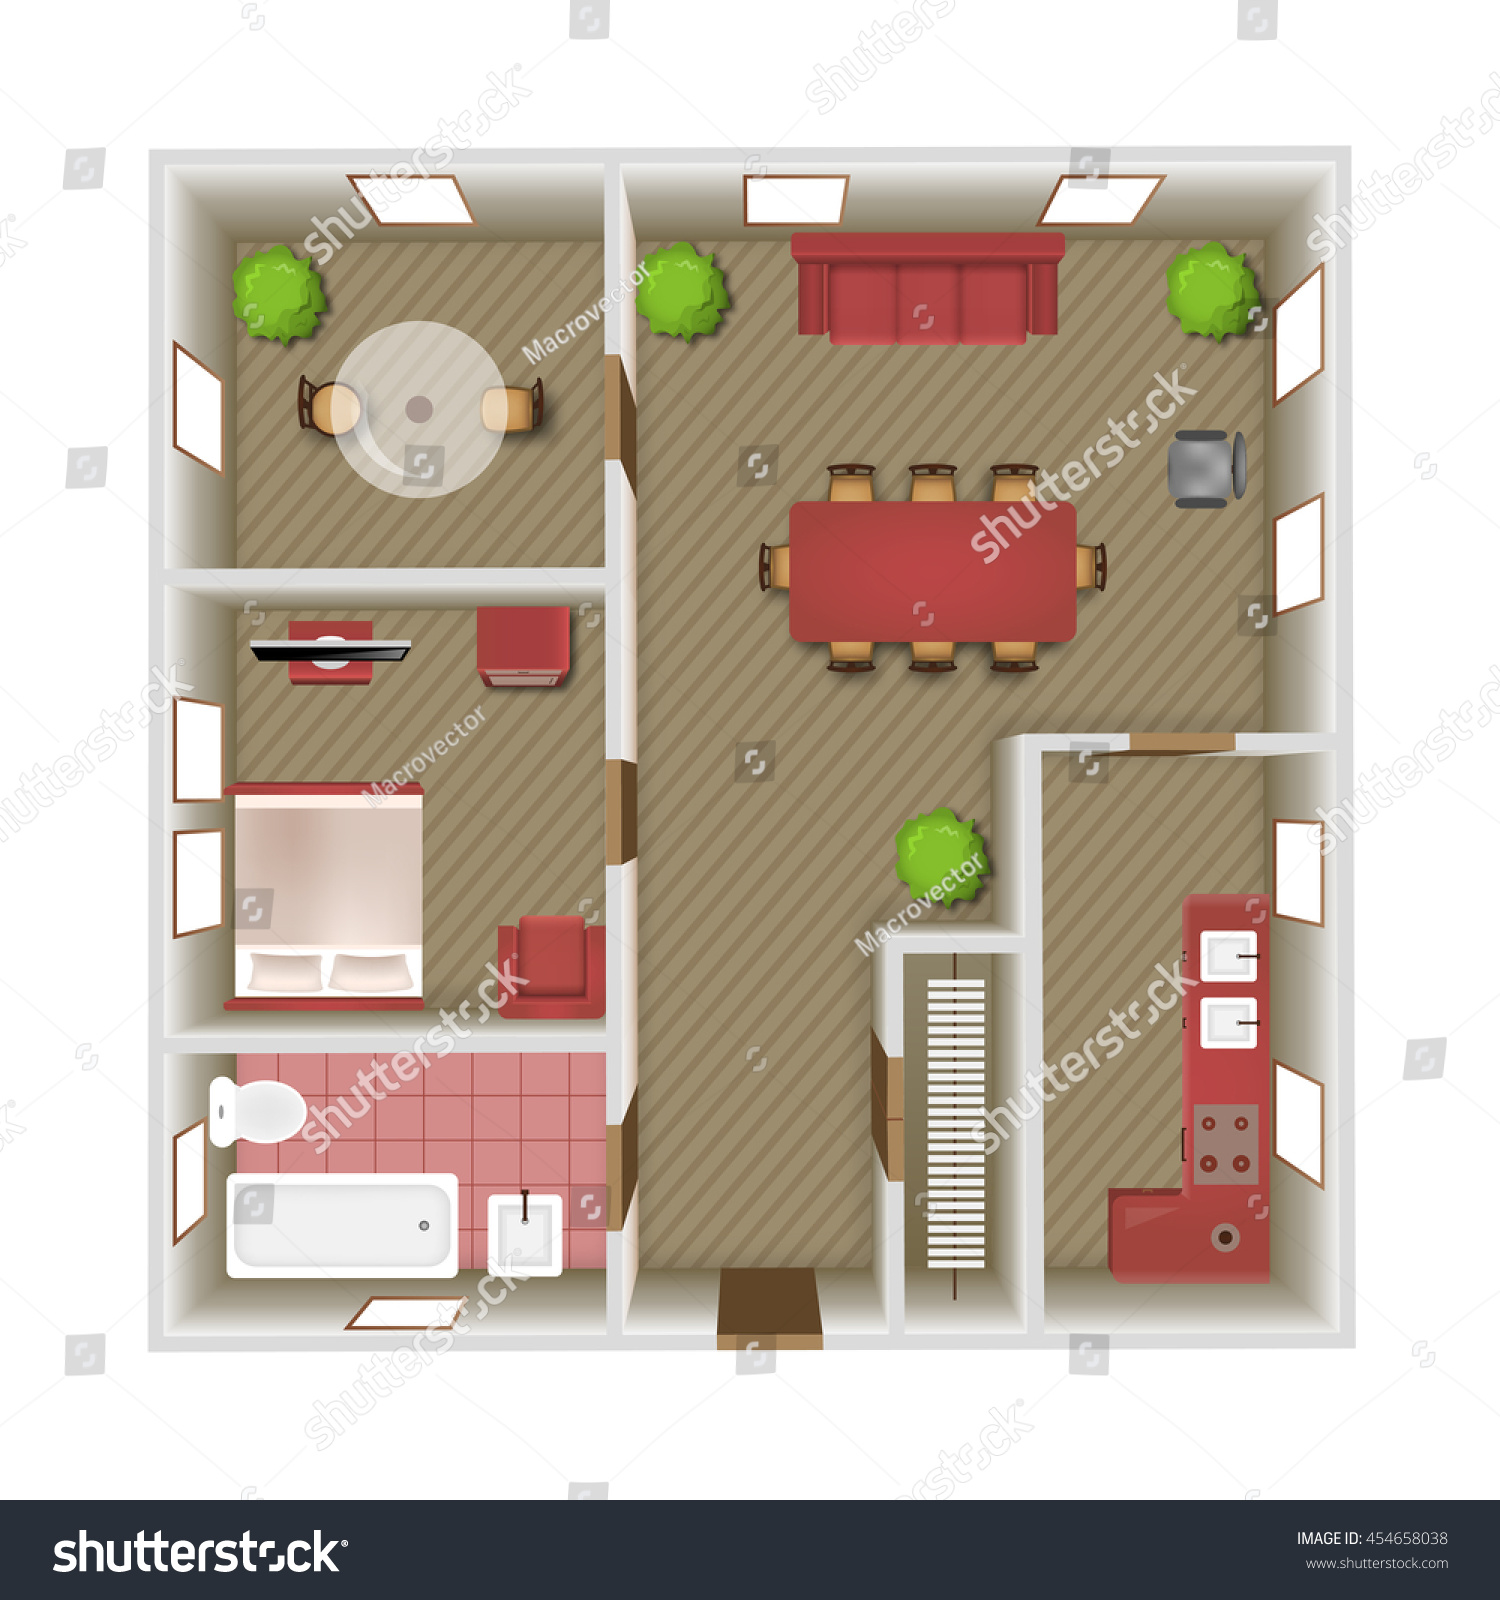 Living room bedroom and bathroom interior top view vector illustration #454658038